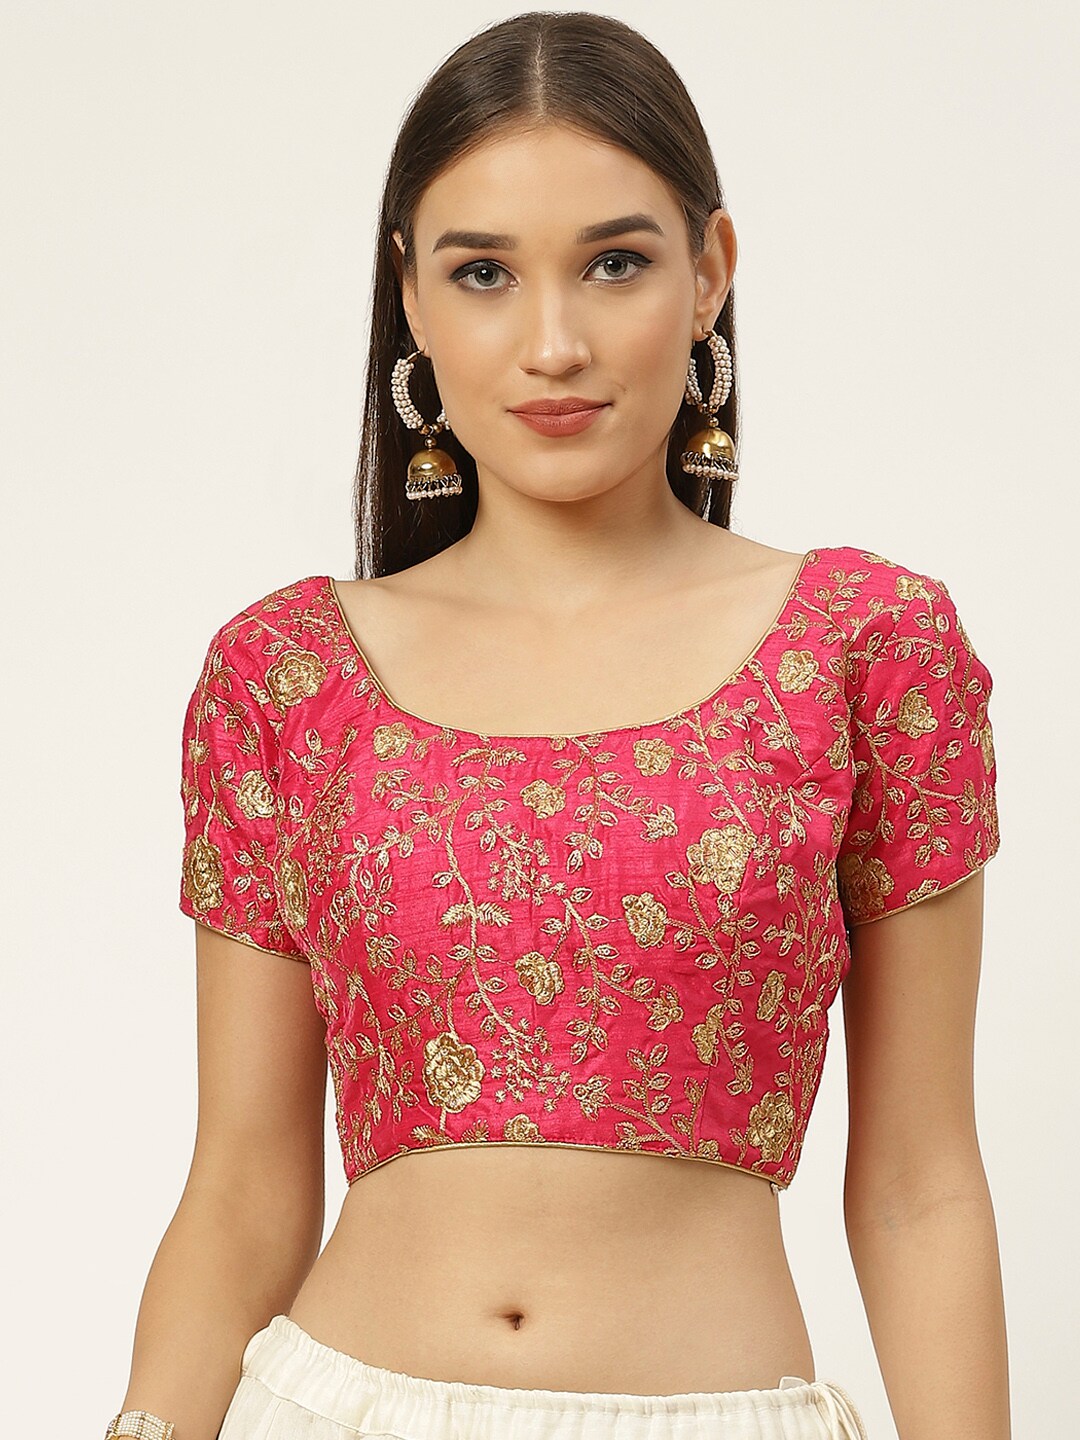 Studio Shringaar Pink Embroidered Saree Blouse Price in India